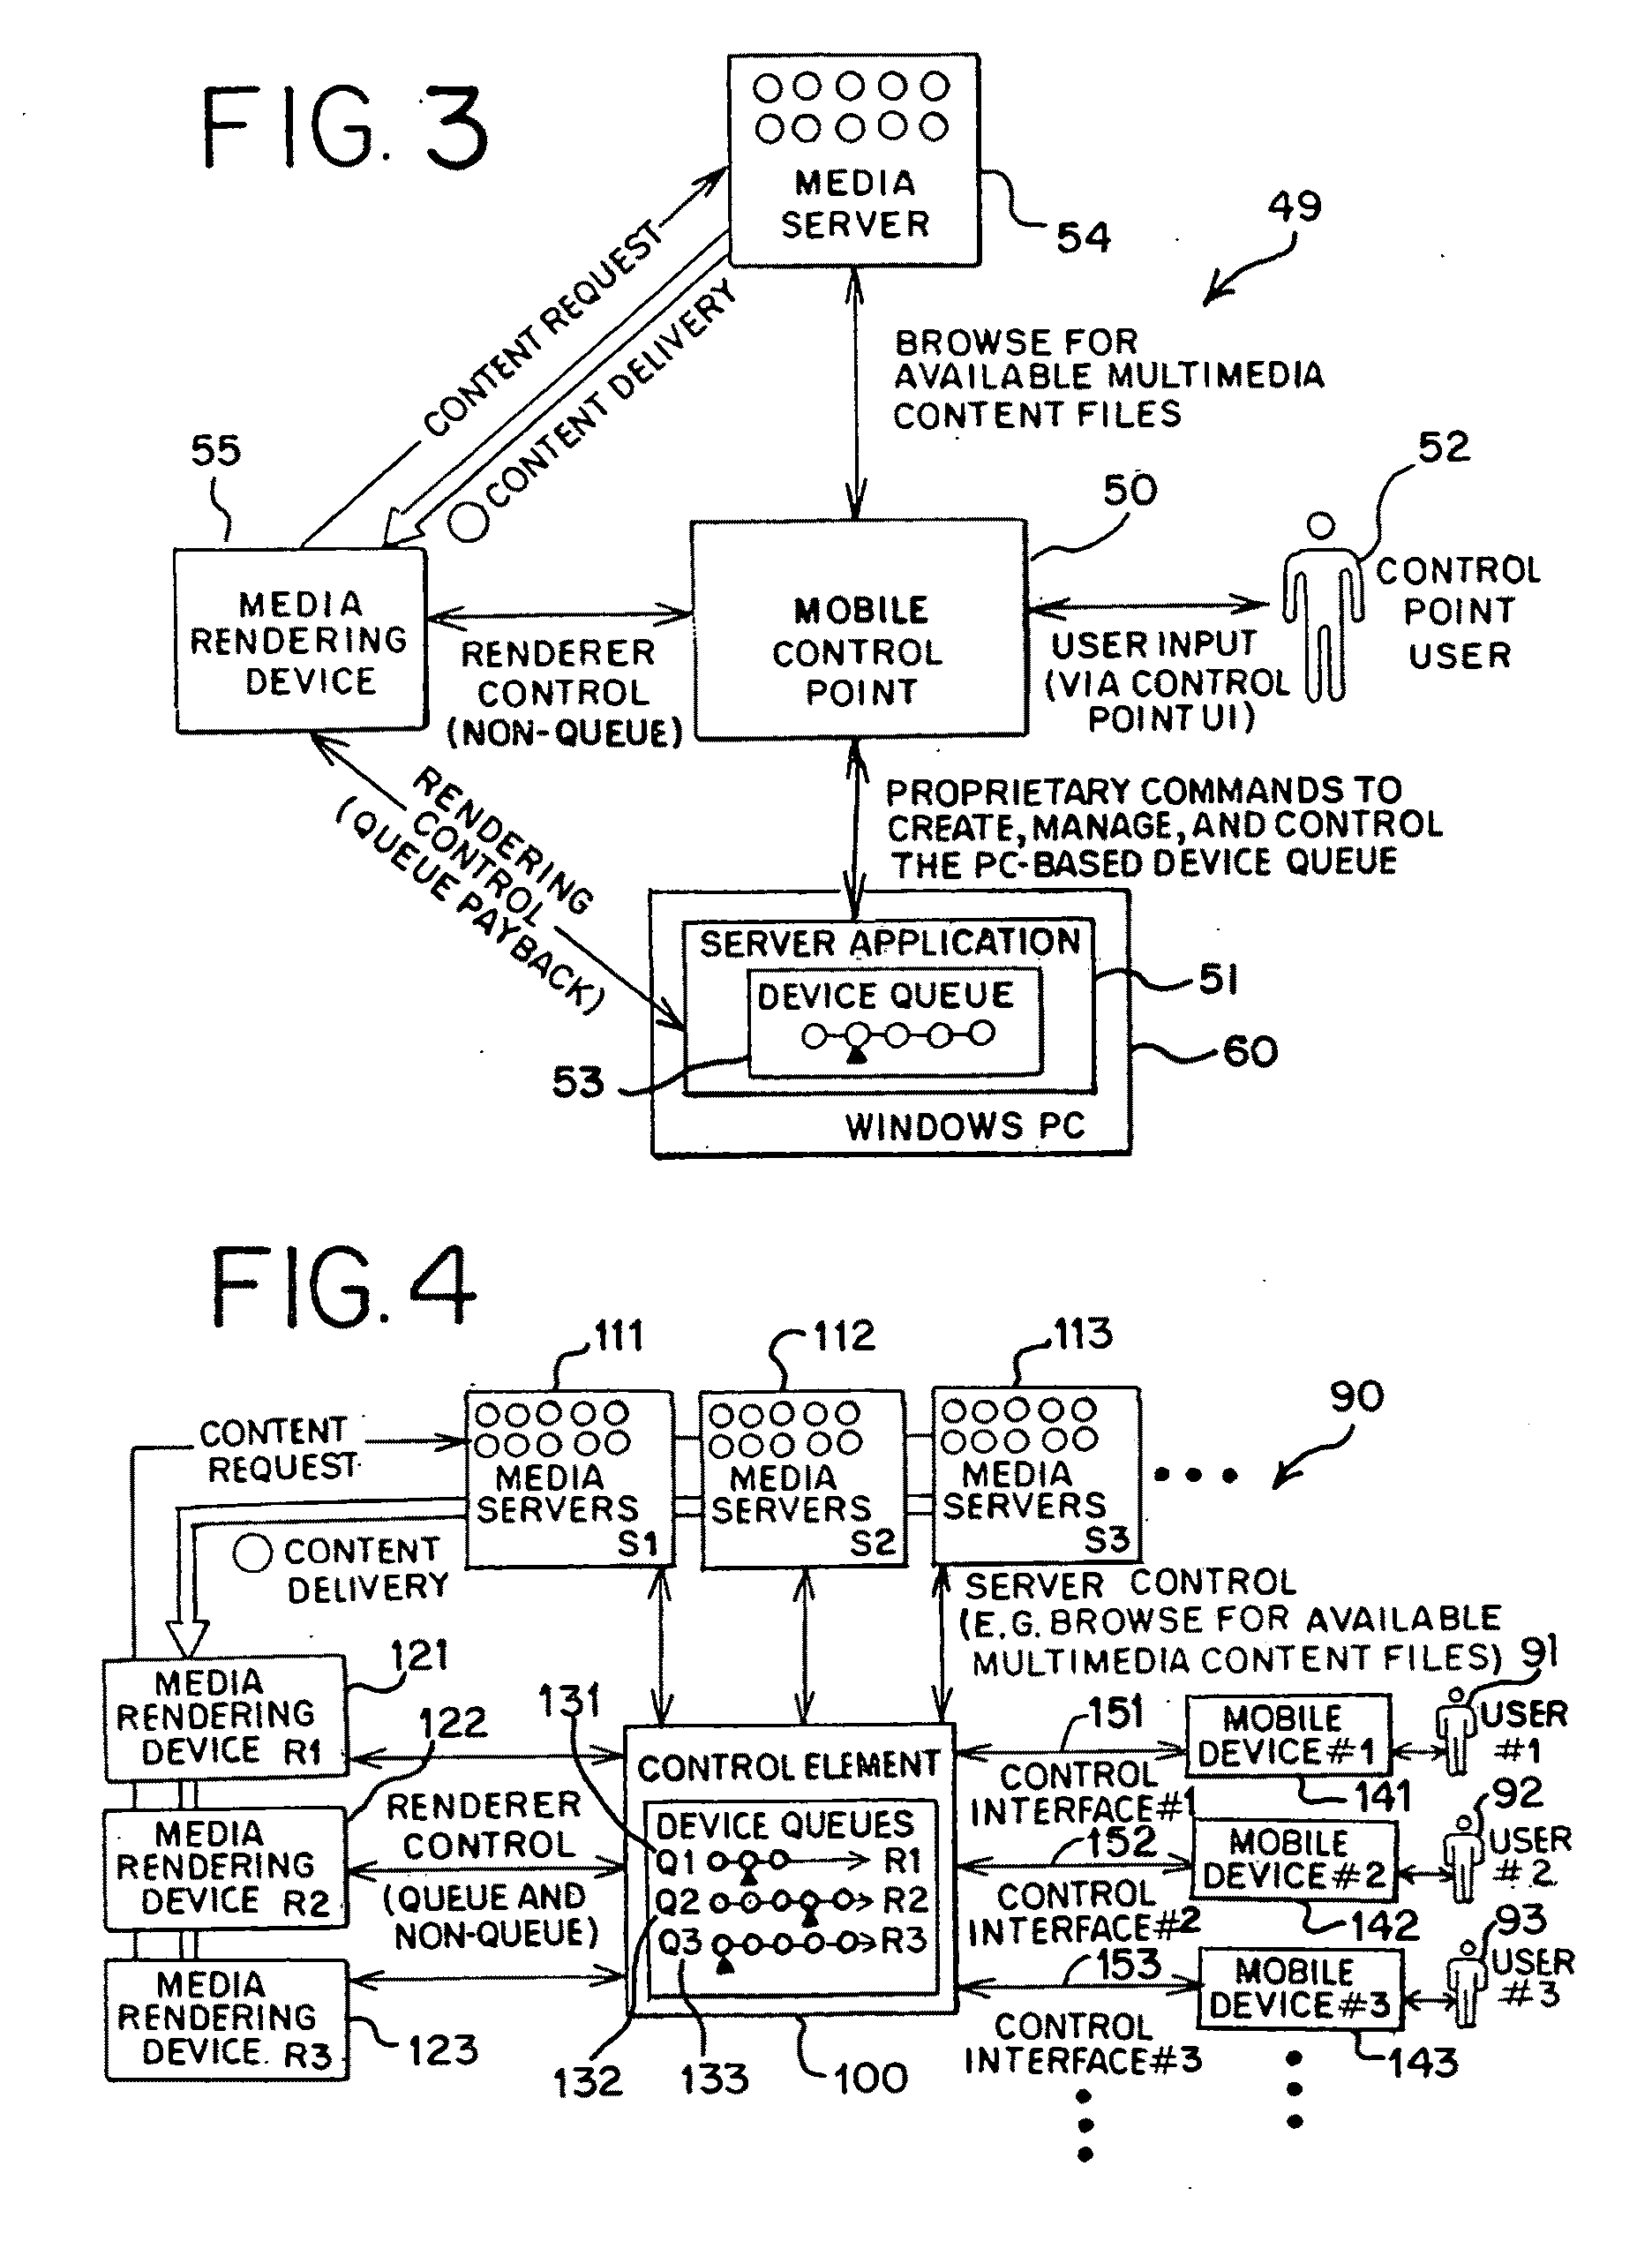 System and method for controlling media rendering in a network using a mobile device